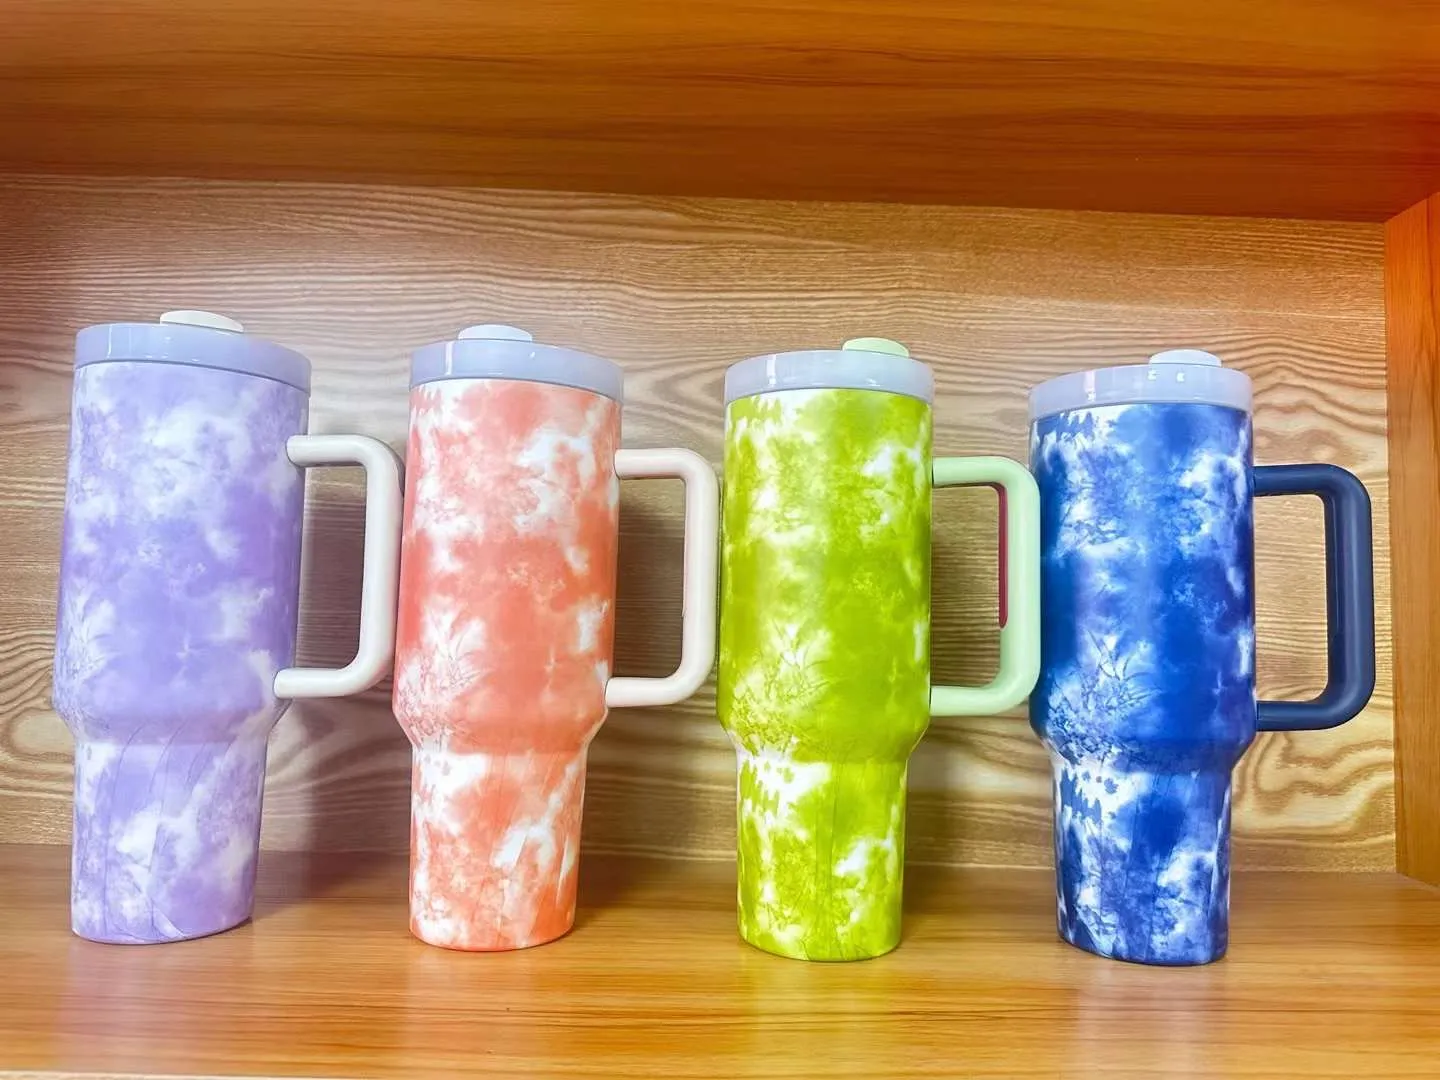 New Arrival! 40oz Tie Dye Travel Tumbler With Handle Stainless Steel Double Wall Insulated Bandhnu Cups Plangi Mugs B0036